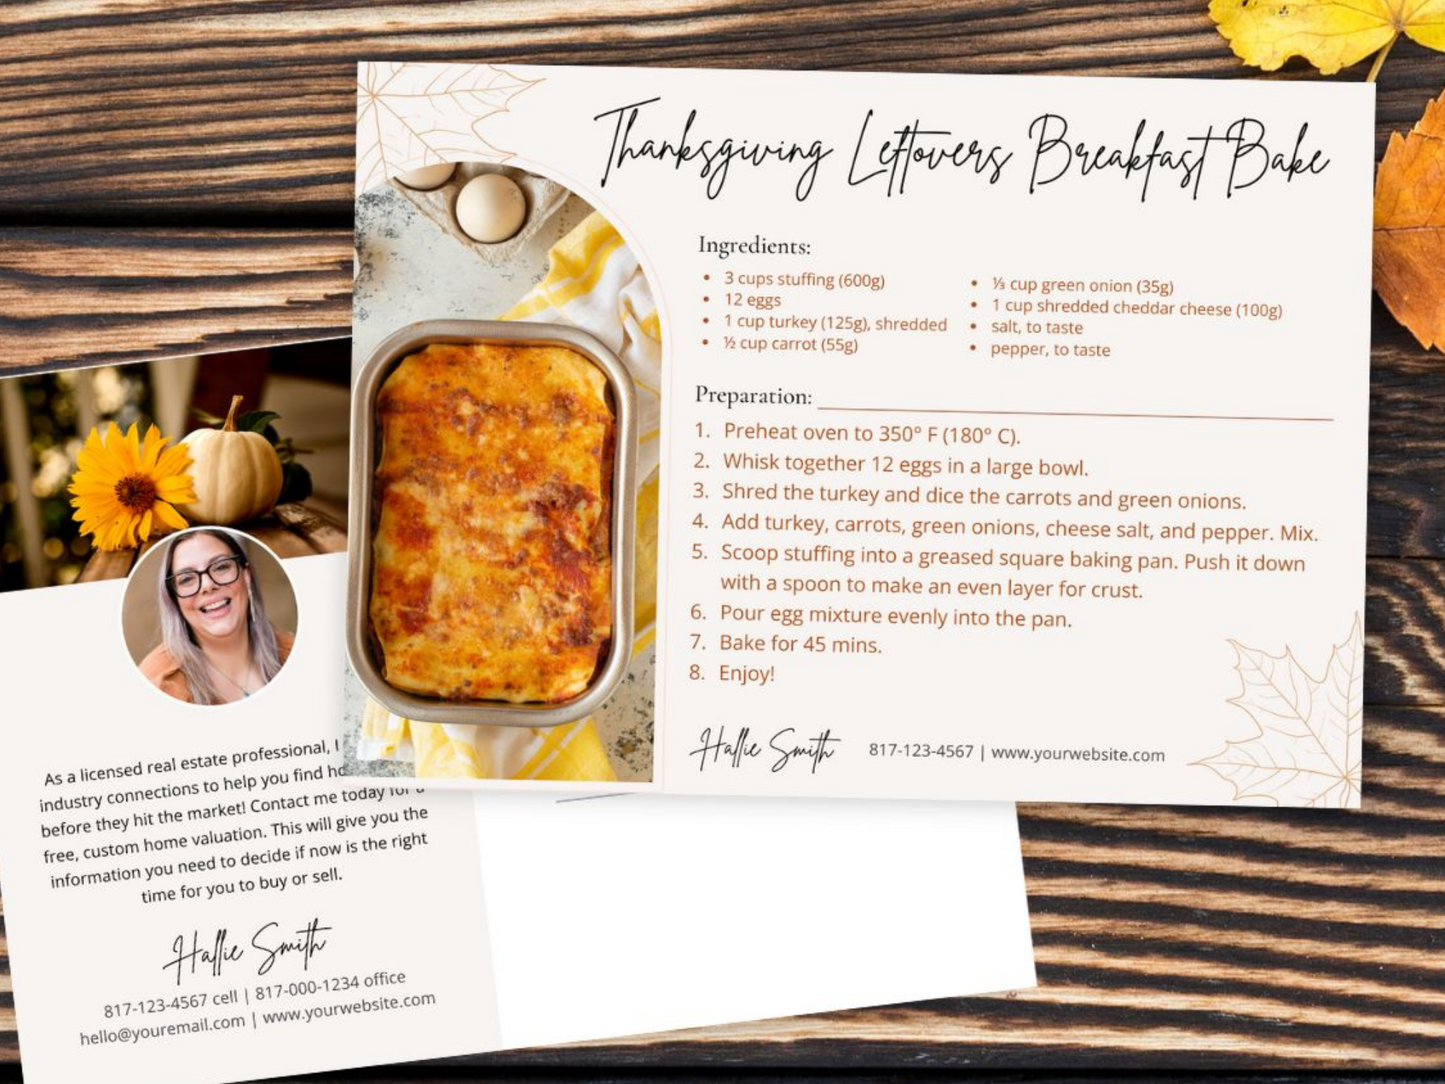 Real Estate Thanksgiving Recipe Postcard - Beautifully crafted postcard featuring a delightful Thanksgiving recipe for expressing gratitude and connecting with clients during the festive season.